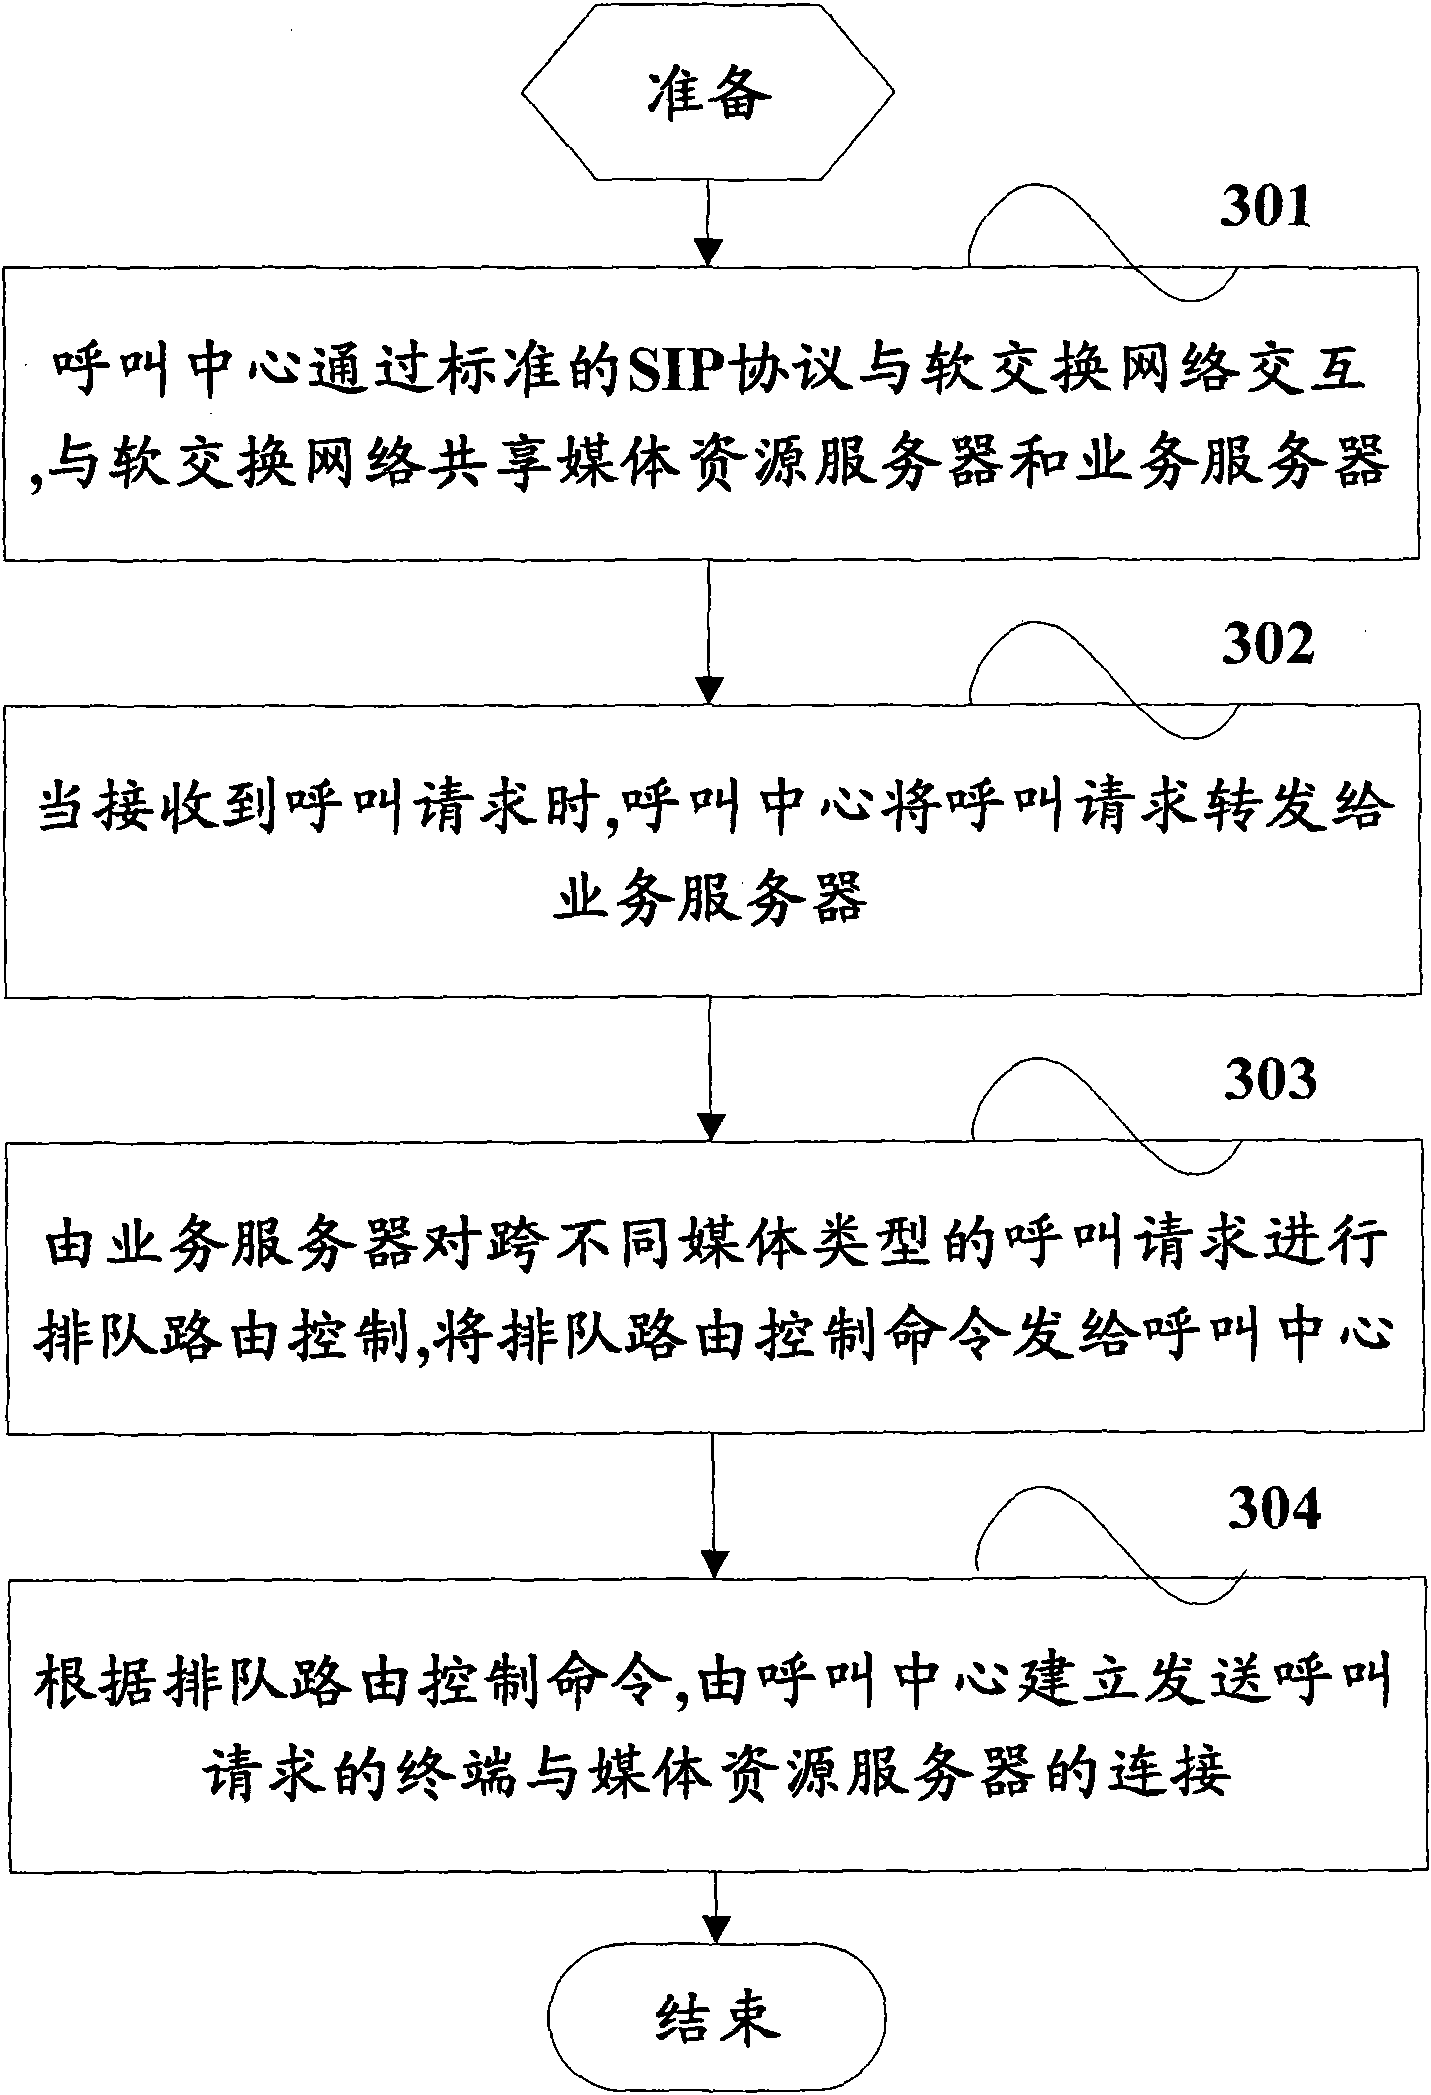 Distributed call center service control method and system